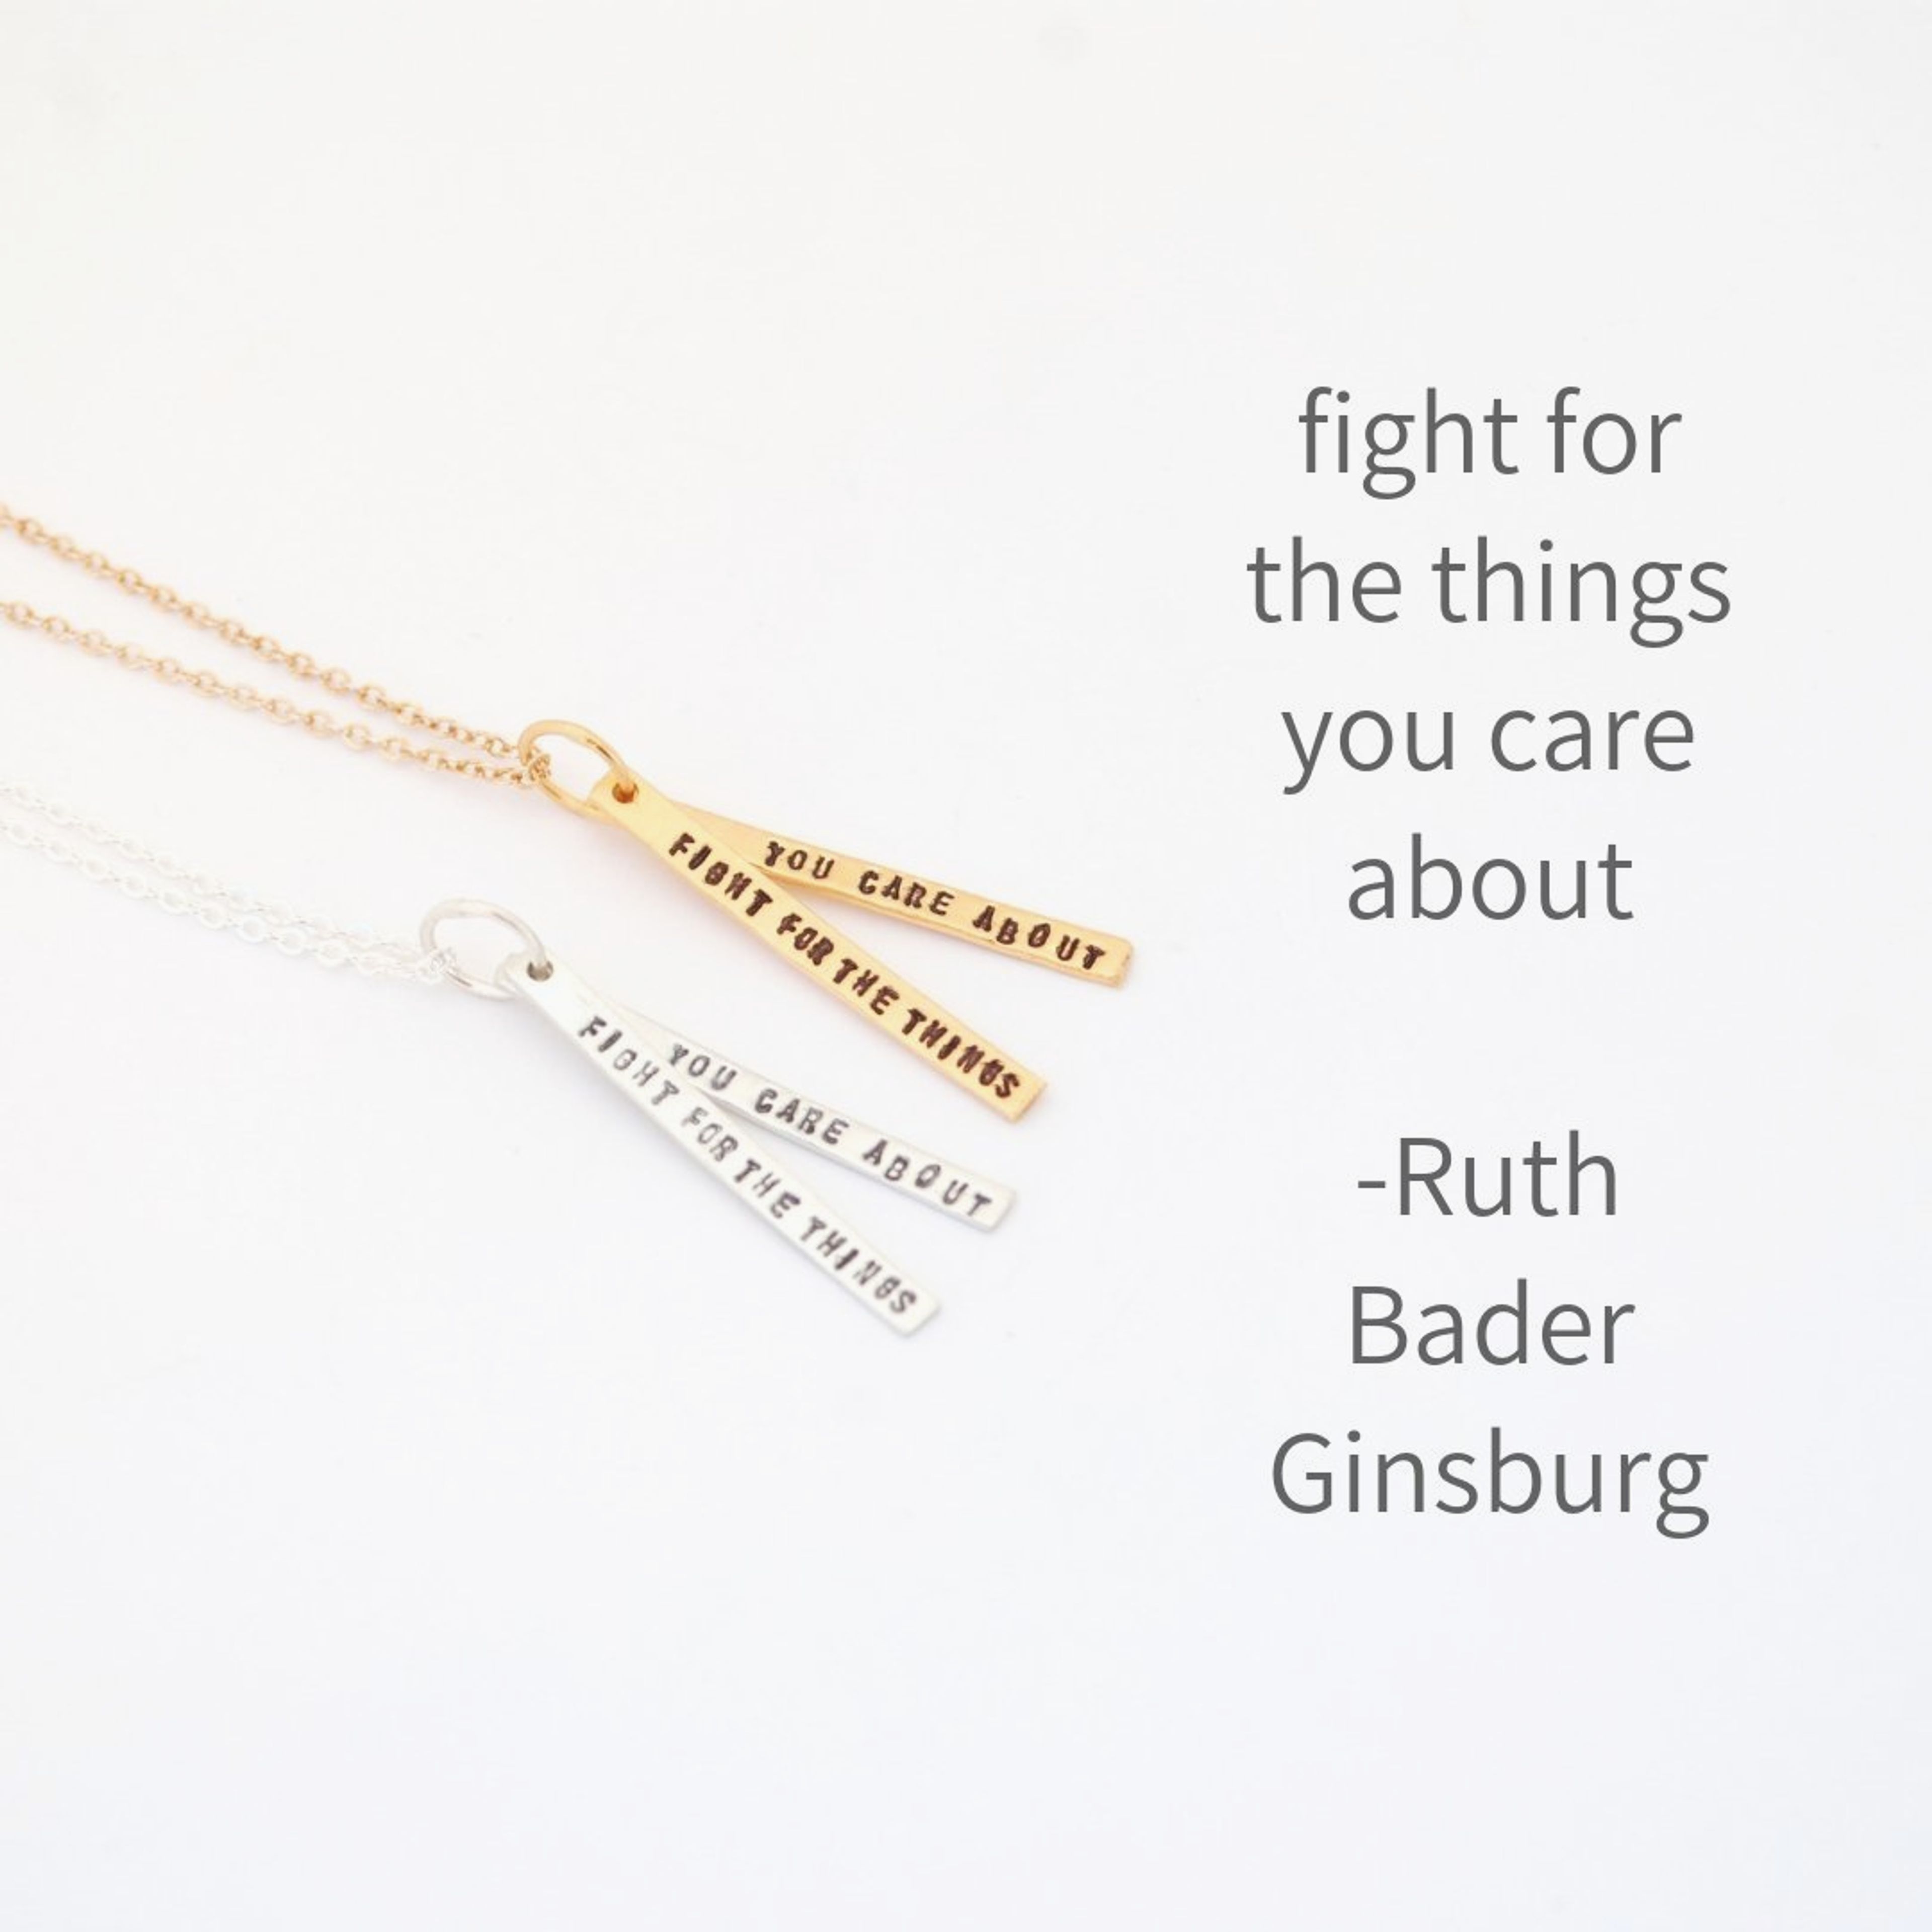 "Fight for the things you care about" -Ruth Bader Ginsburg quote necklace